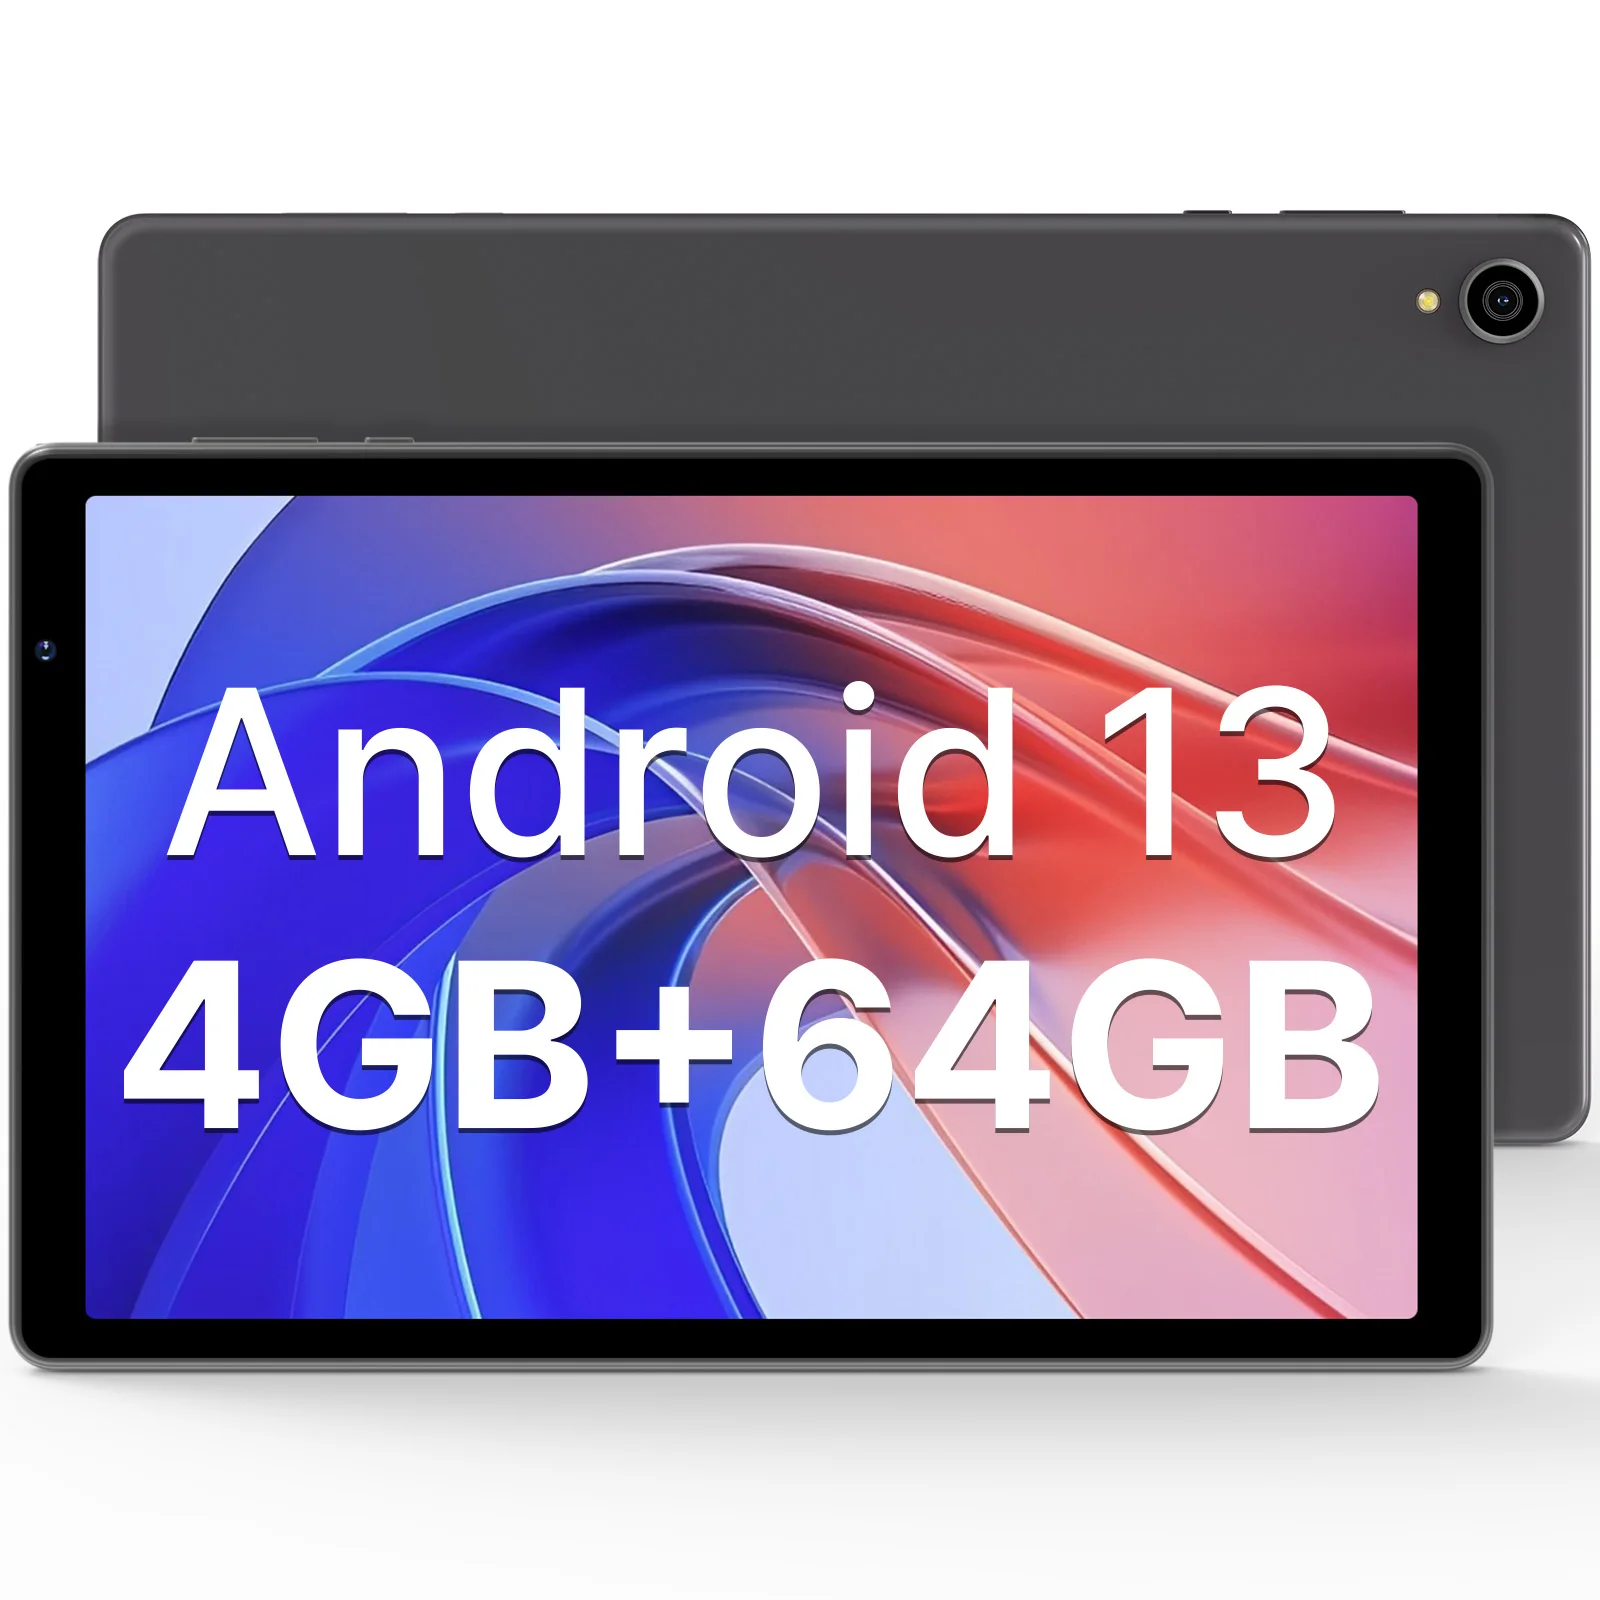 

10.1 inch 4G RAM 64GB ROM Support 128GB Expand Tablet Pc Octa Core 1280*800 5G WiFi 4G LTE Android Computer Tablet